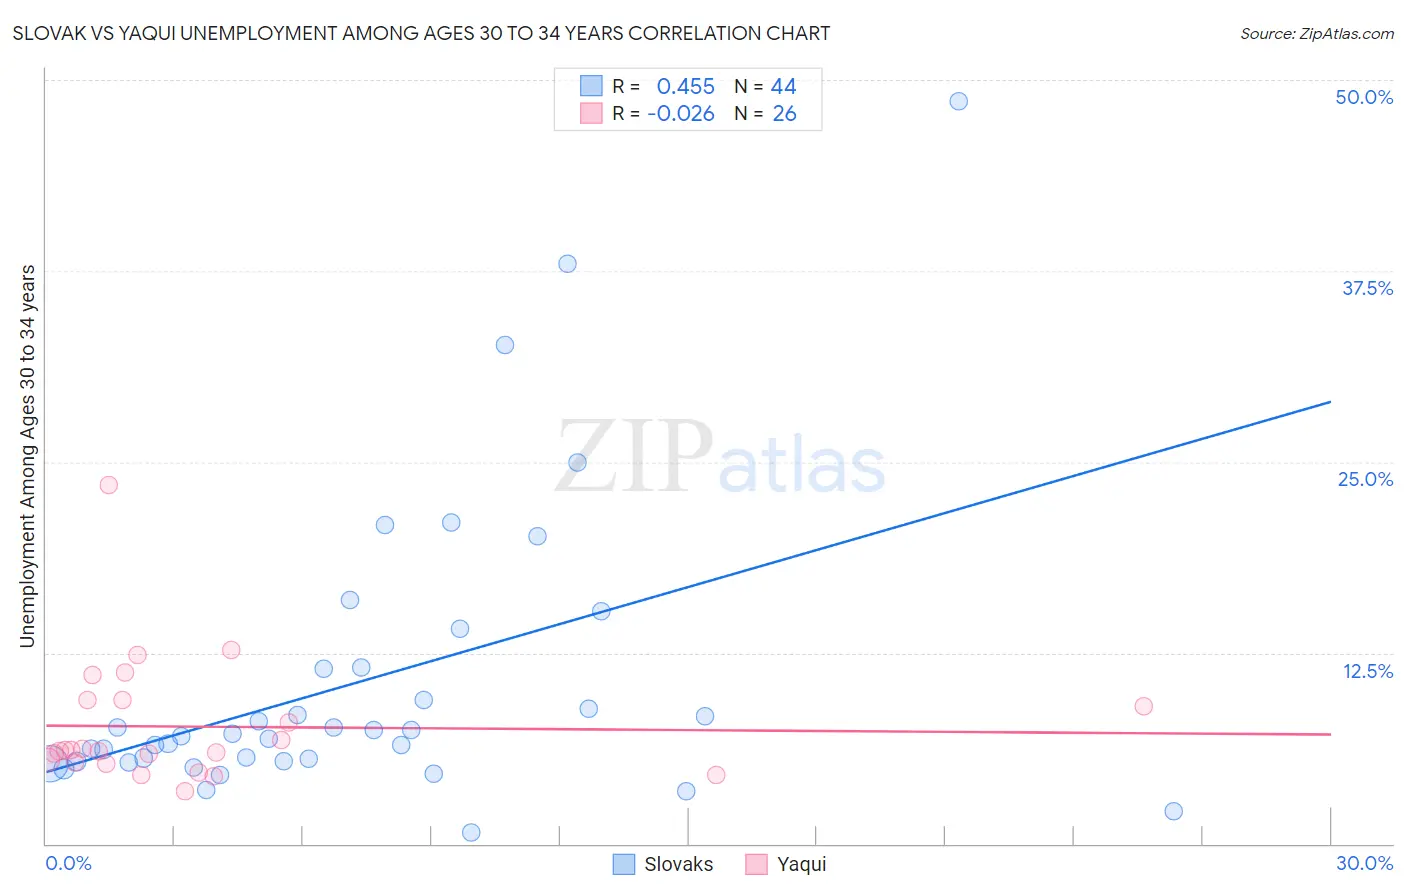 Slovak vs Yaqui Unemployment Among Ages 30 to 34 years